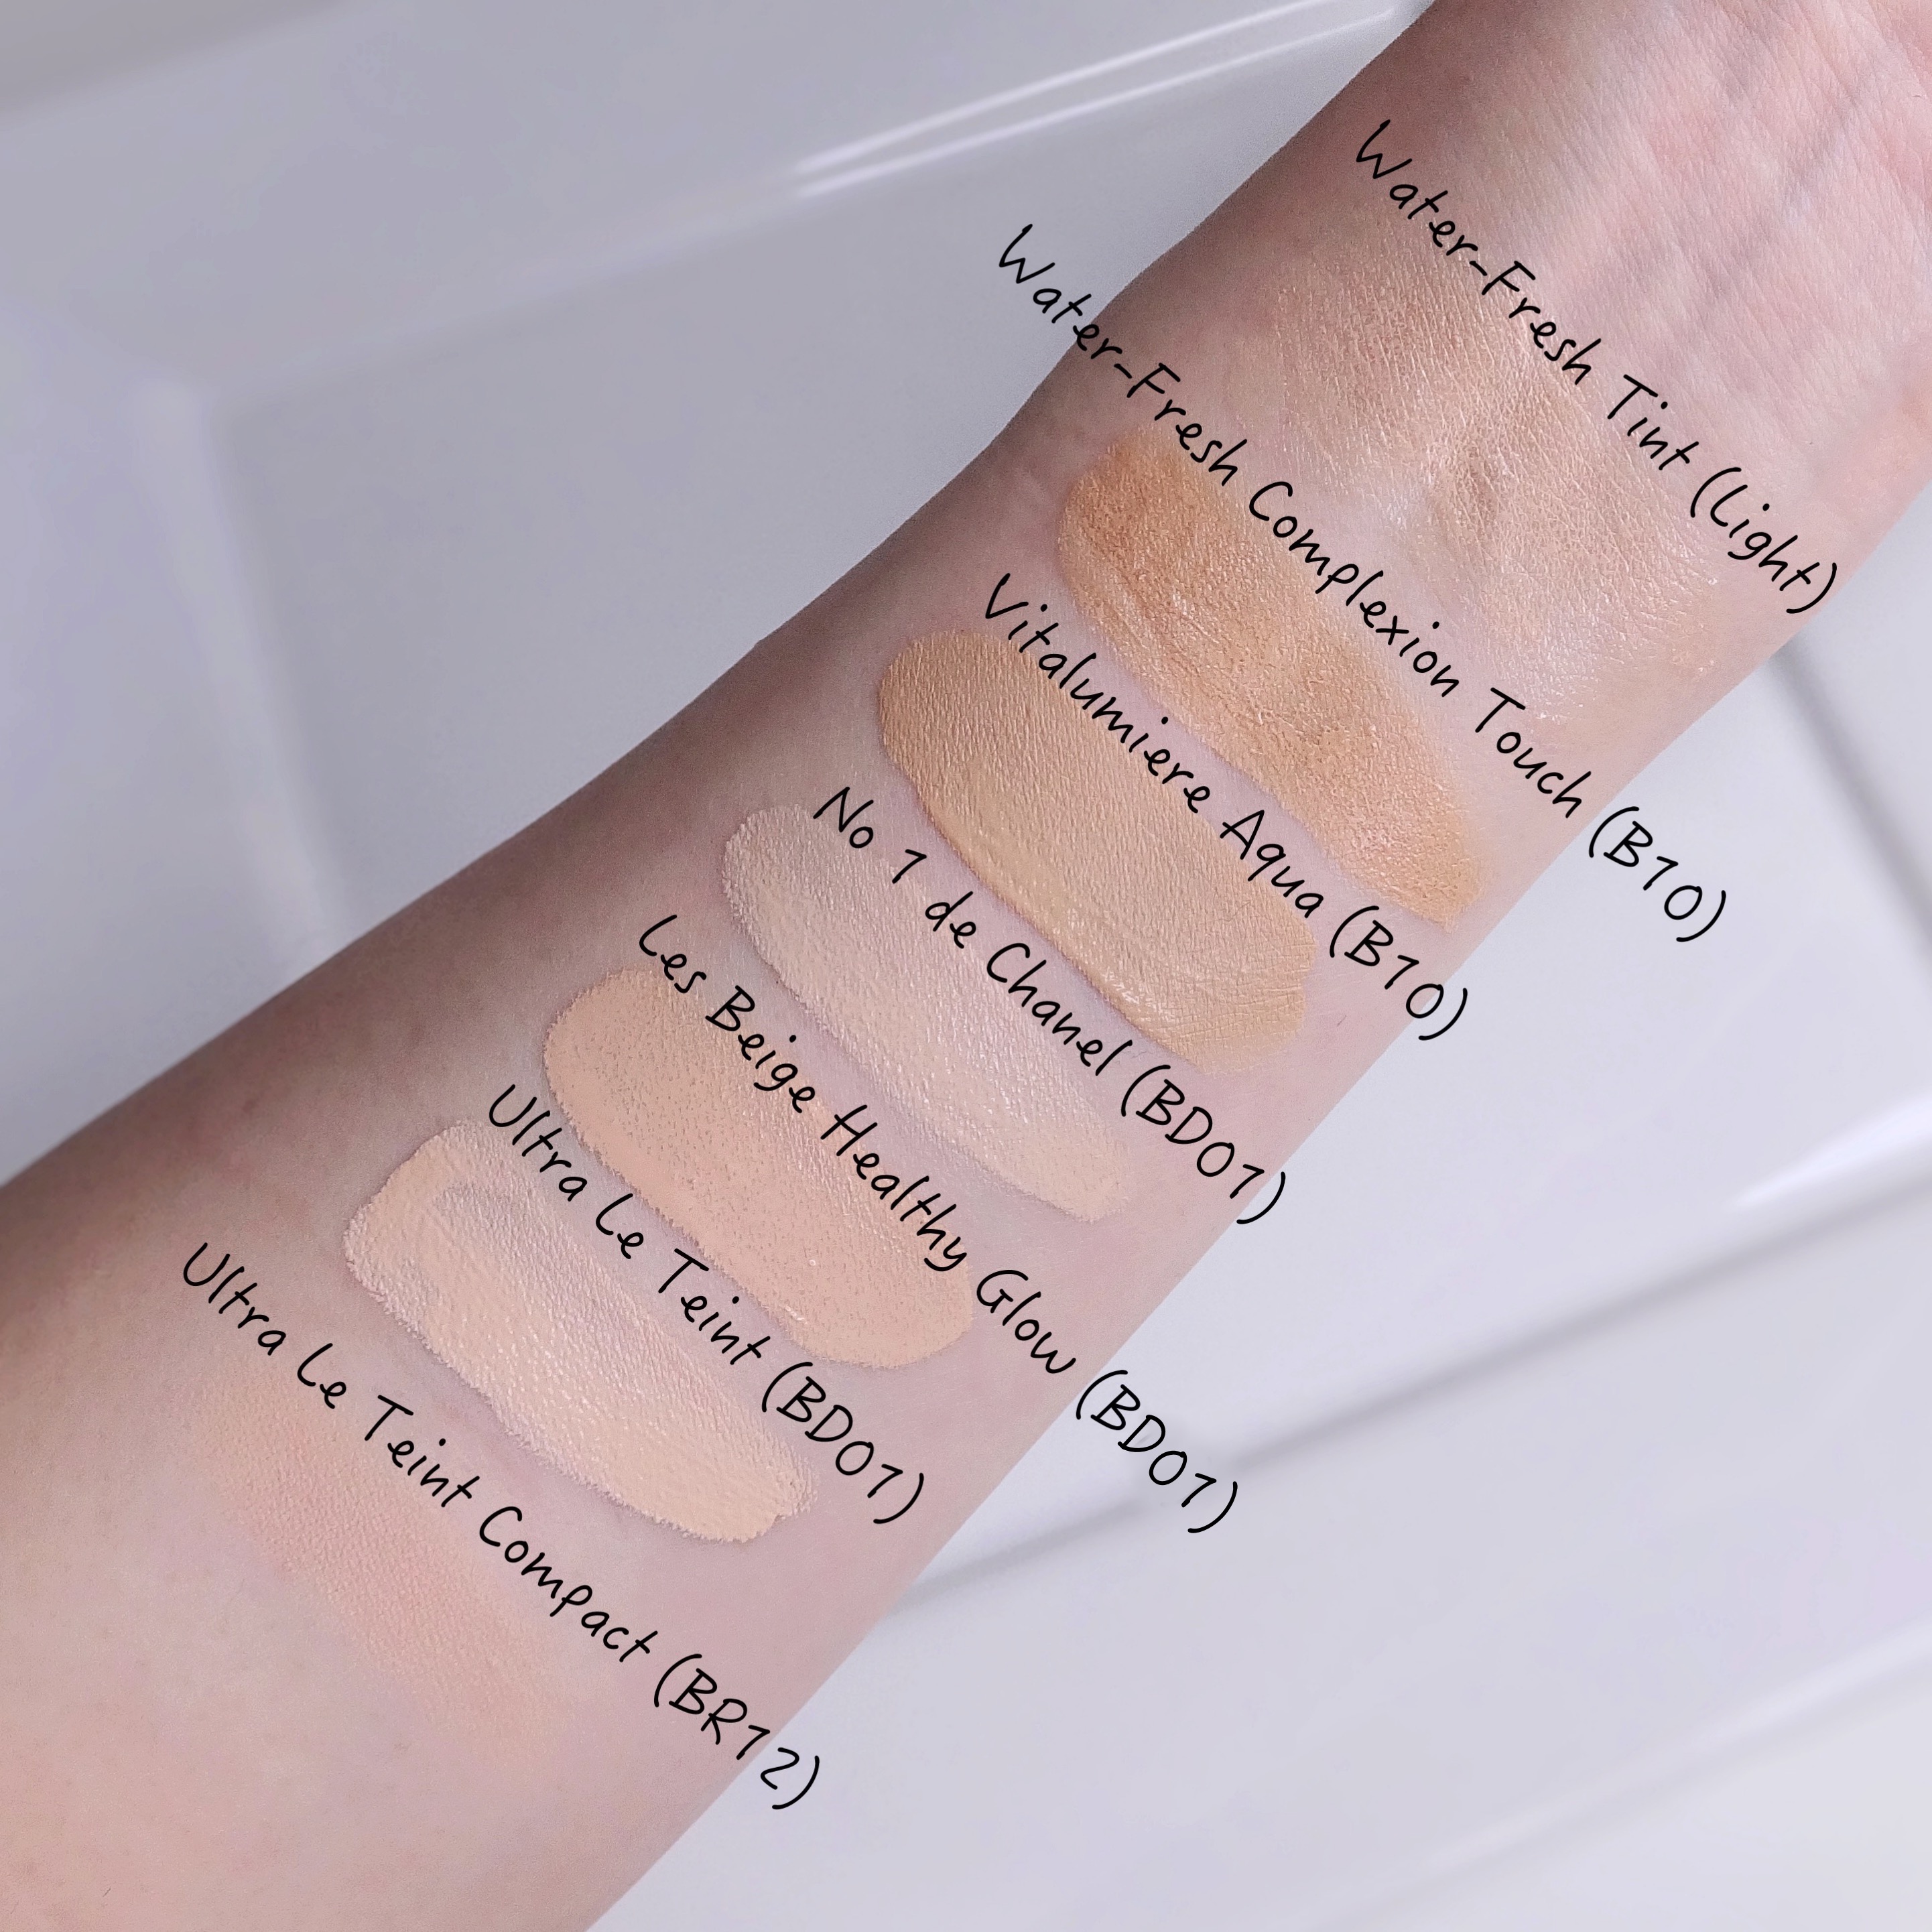 chanel ultra le teint swatch